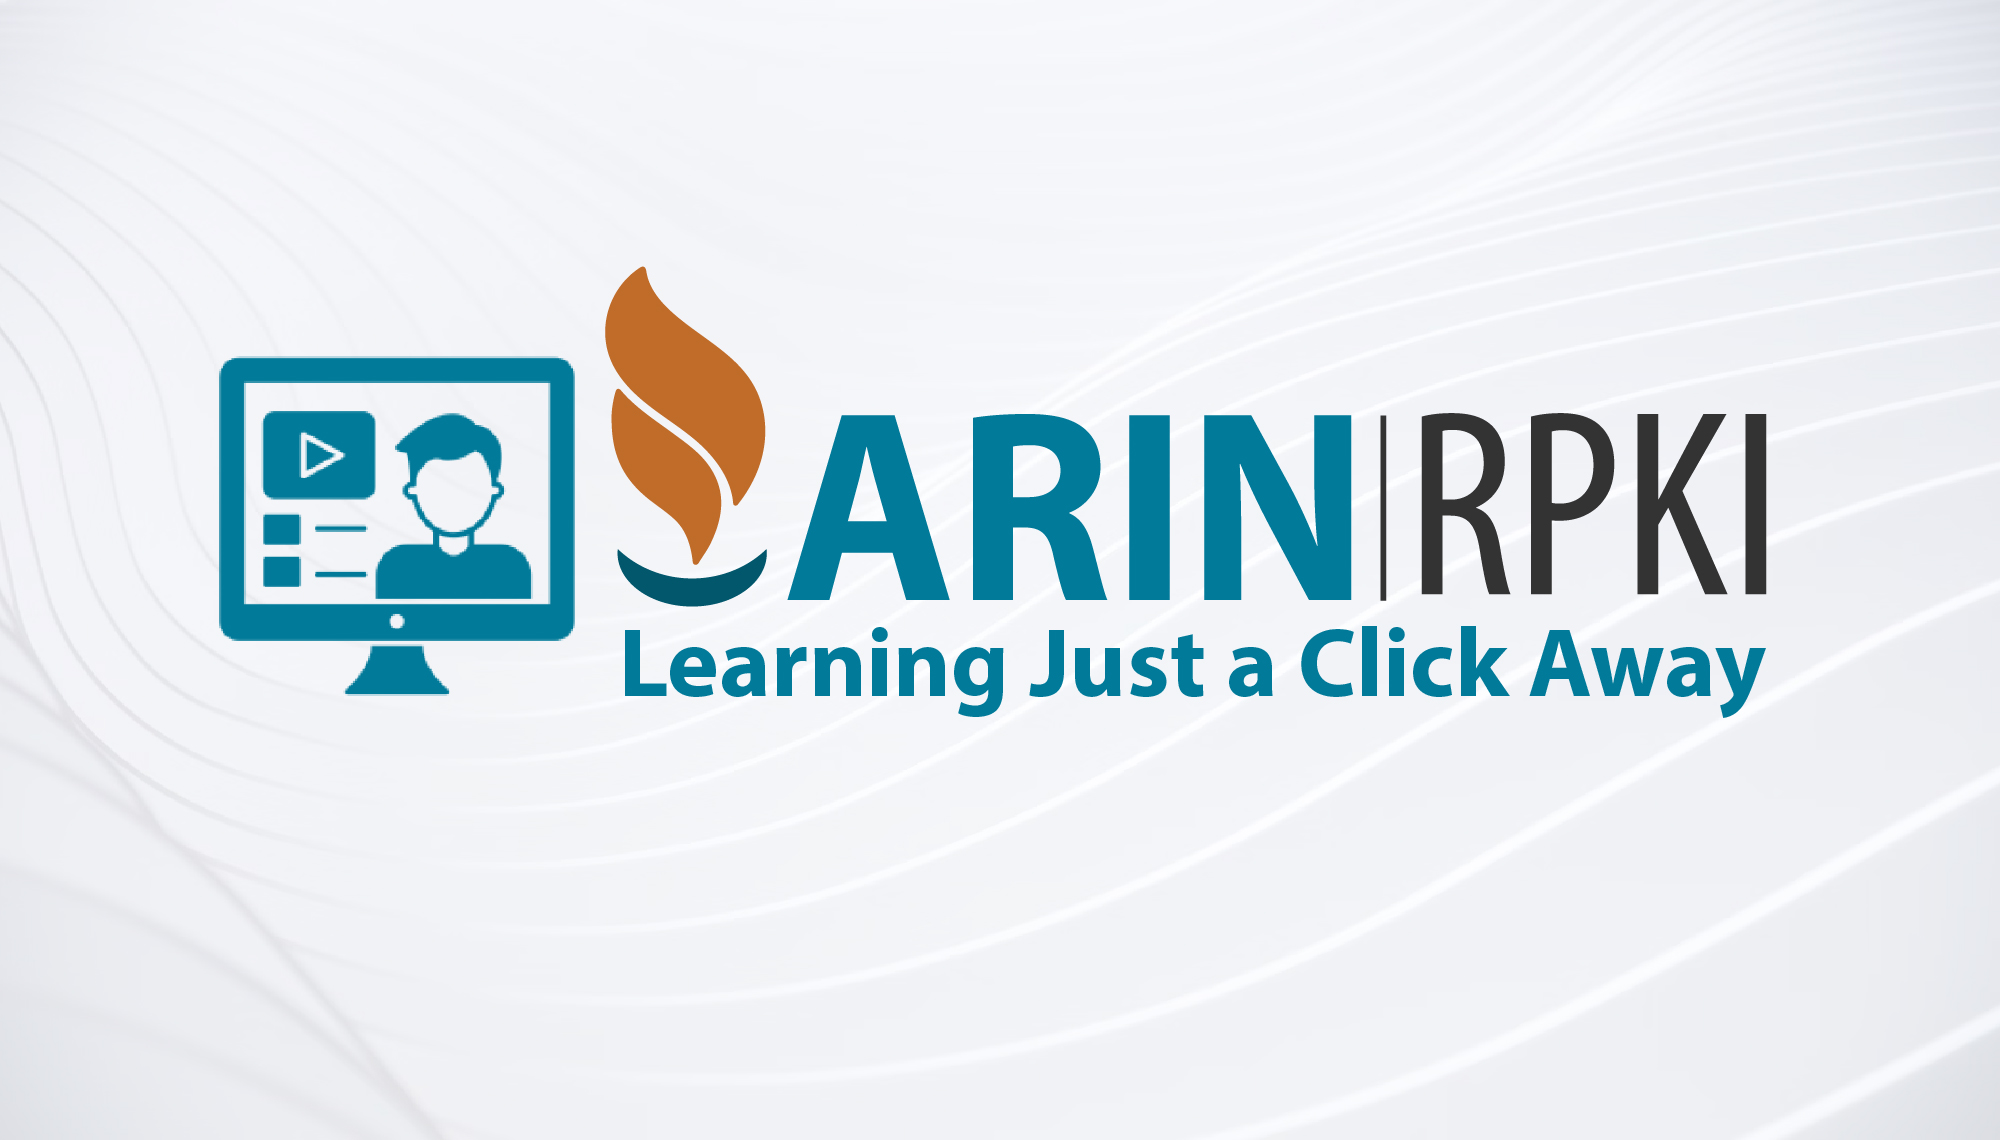 Read the blog RPKI Learning Just a Click Away